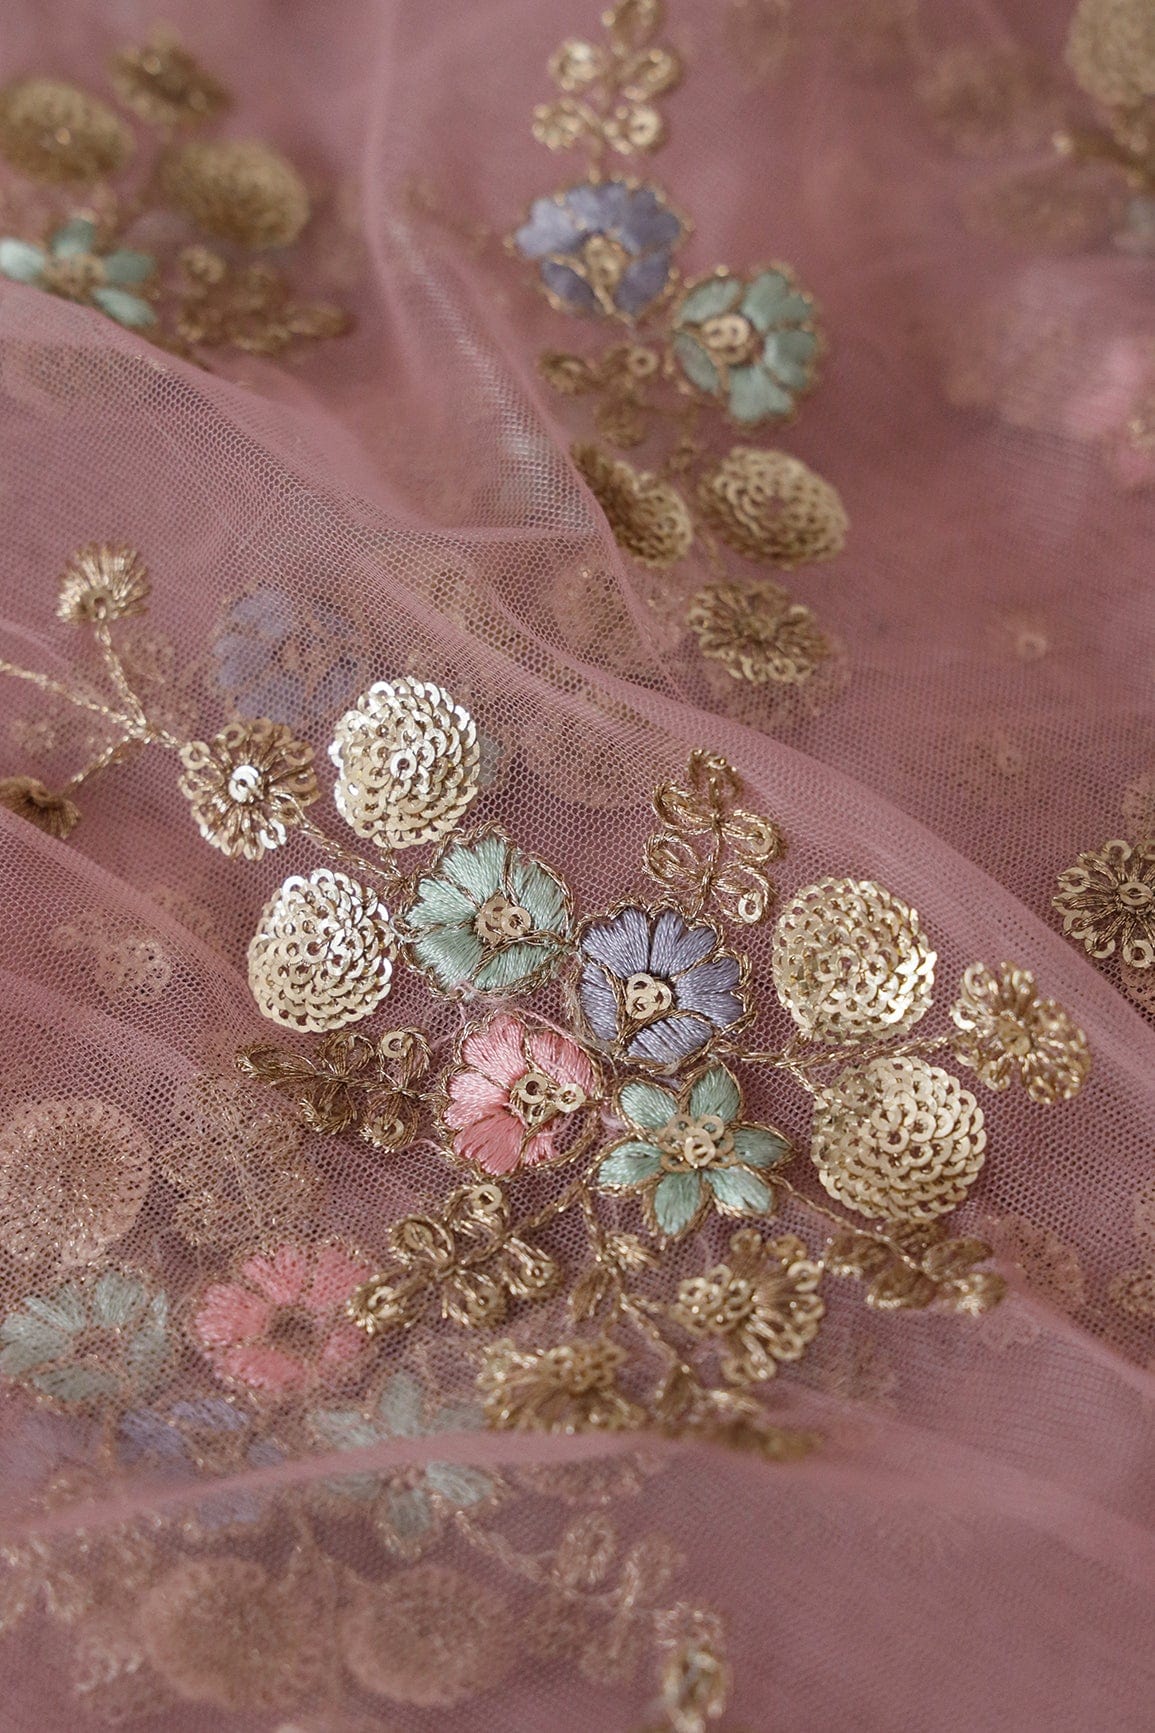 doeraa Embroidery Fabrics 1 Meter Cut Piece of Multi Thread With Gold Zari And Gold Sequins Beautiful Floral Embroidery On Baby Pink Soft Net Fabric